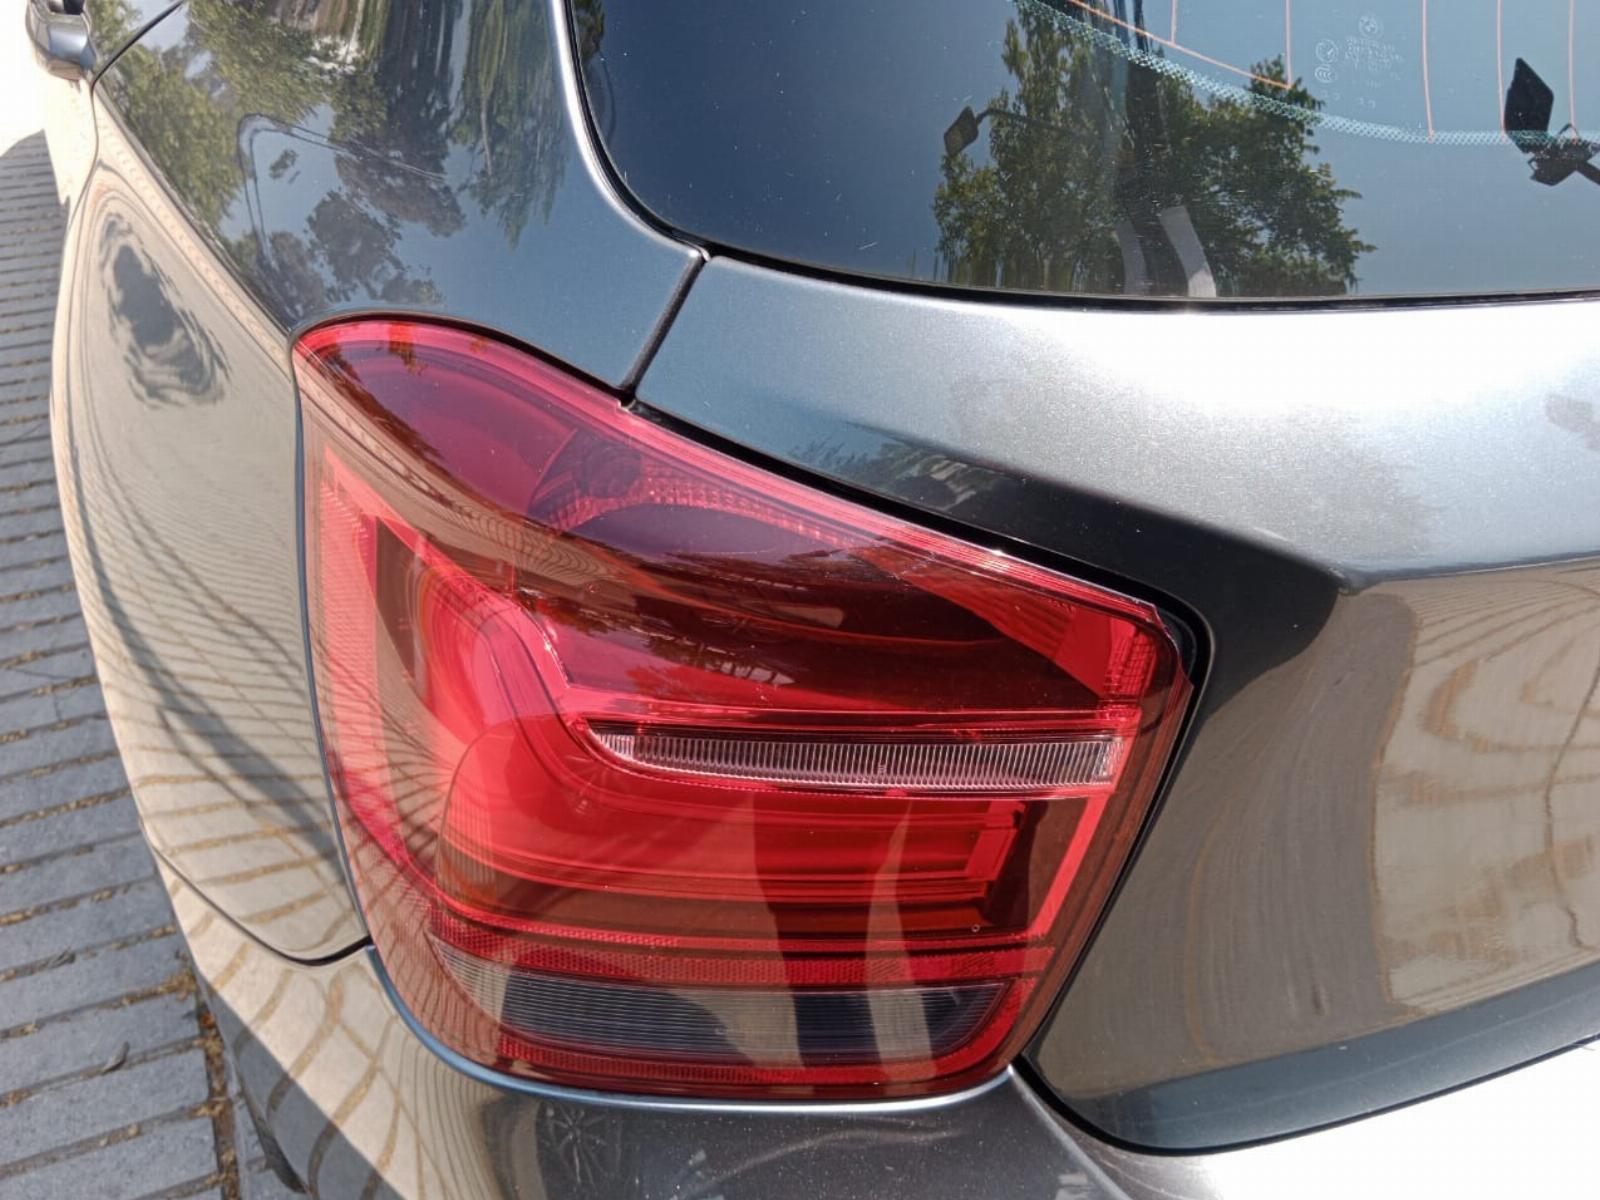 BMW M135I 3.0 AUTO 2014 IMPECABLE - KENNEDY AUTOMOVILES